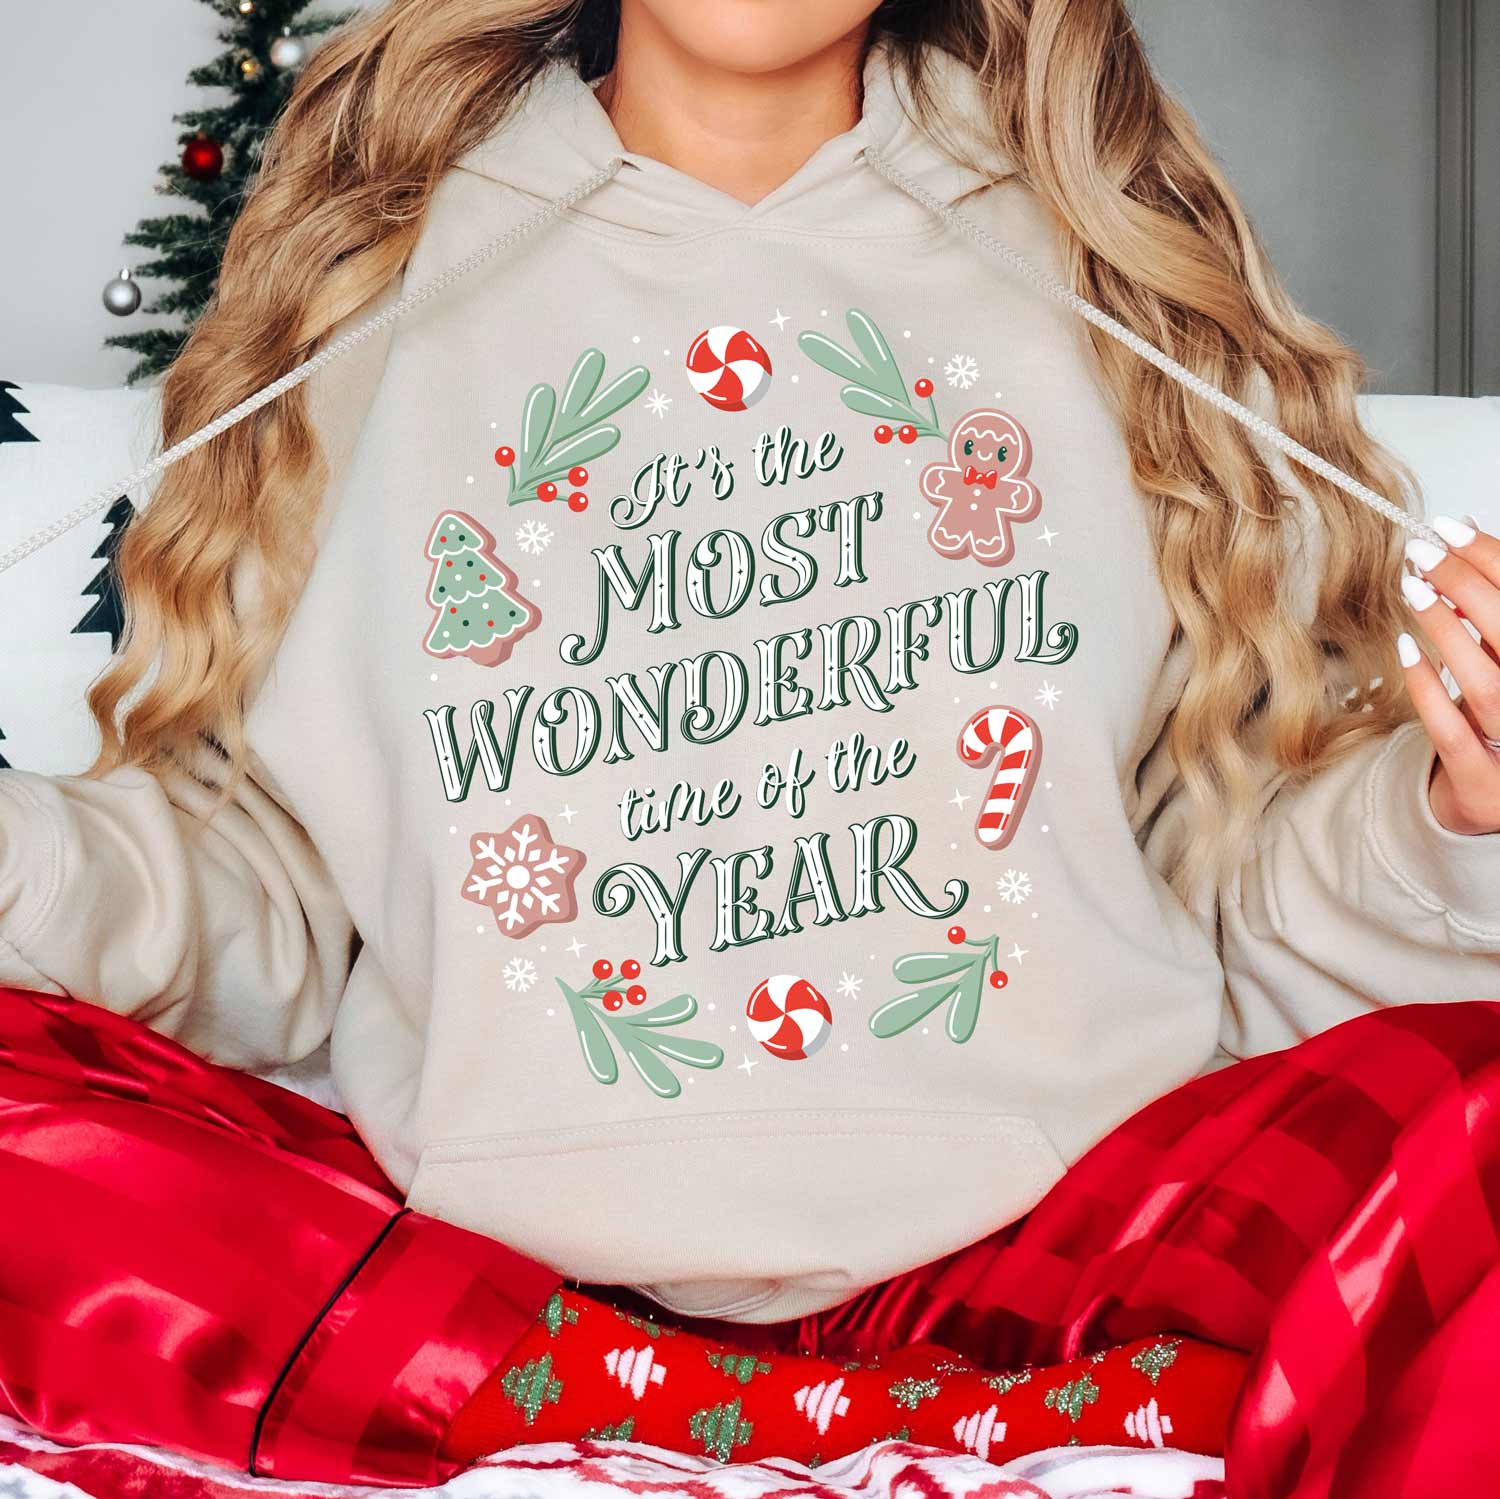 It's the Most Wonderful Time of the Year Unisex Hoodie